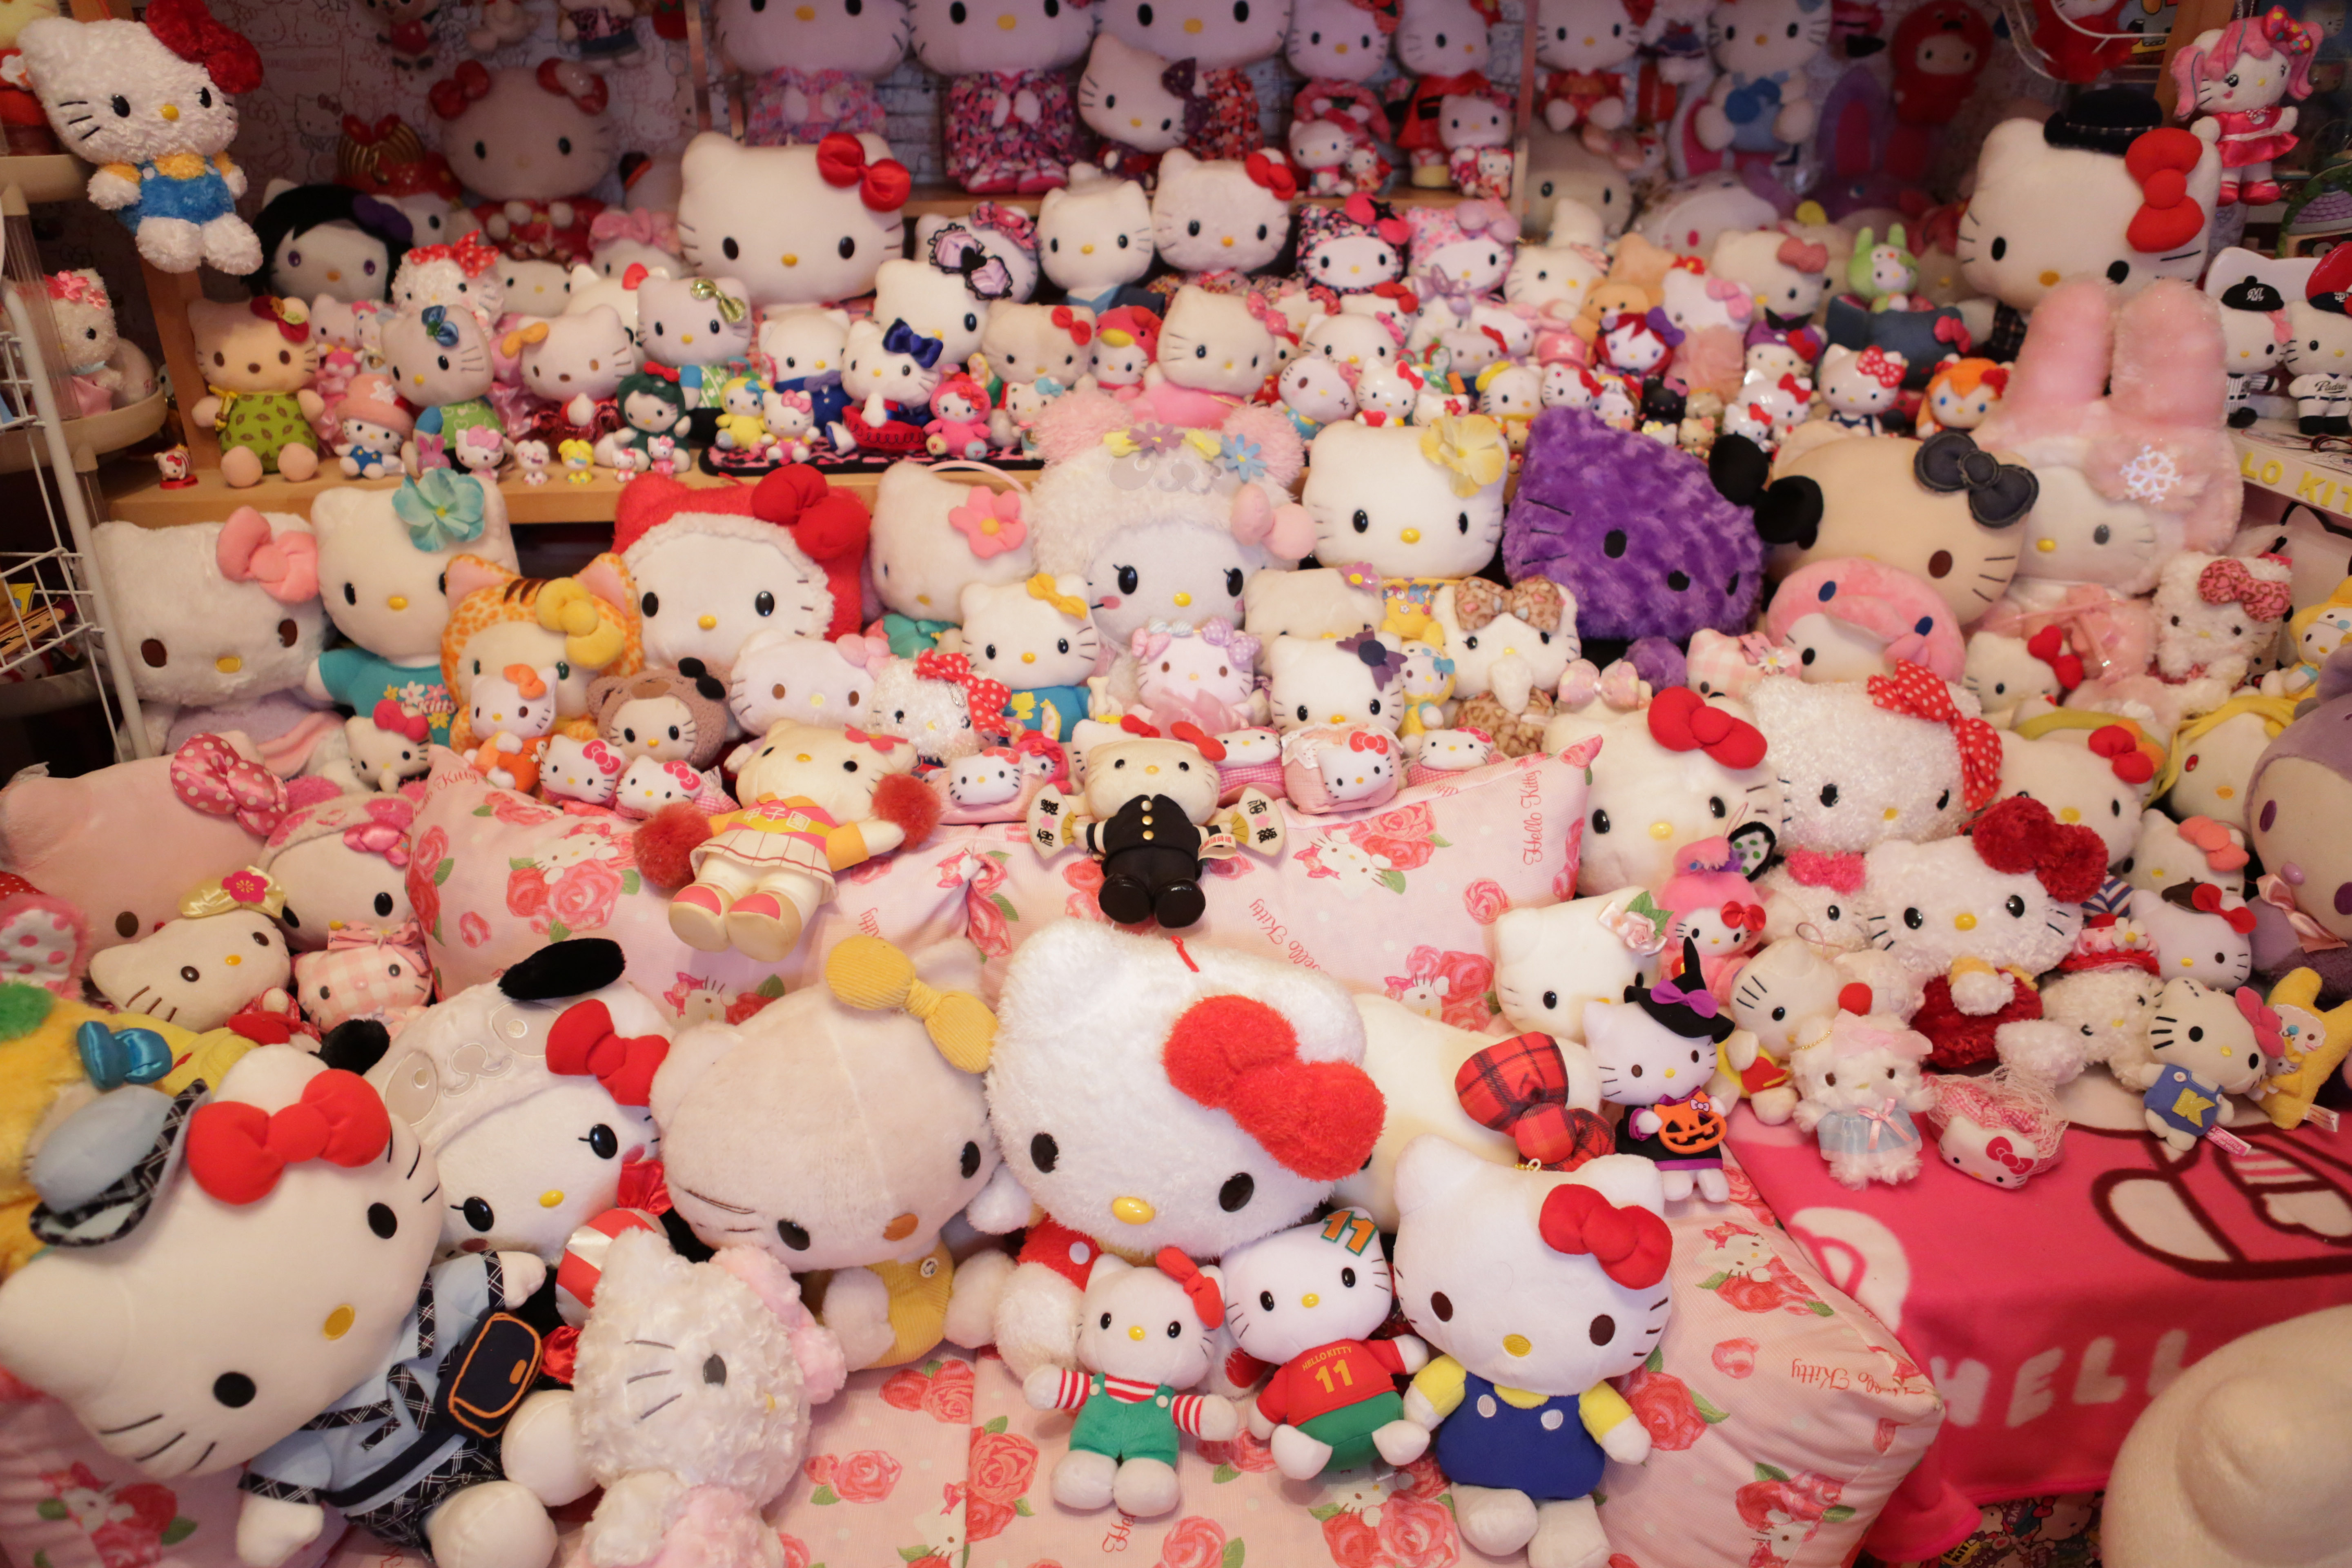 Retired Japanese Policeman Seaks Solace In World’s Biggest Hello Kitty Collection